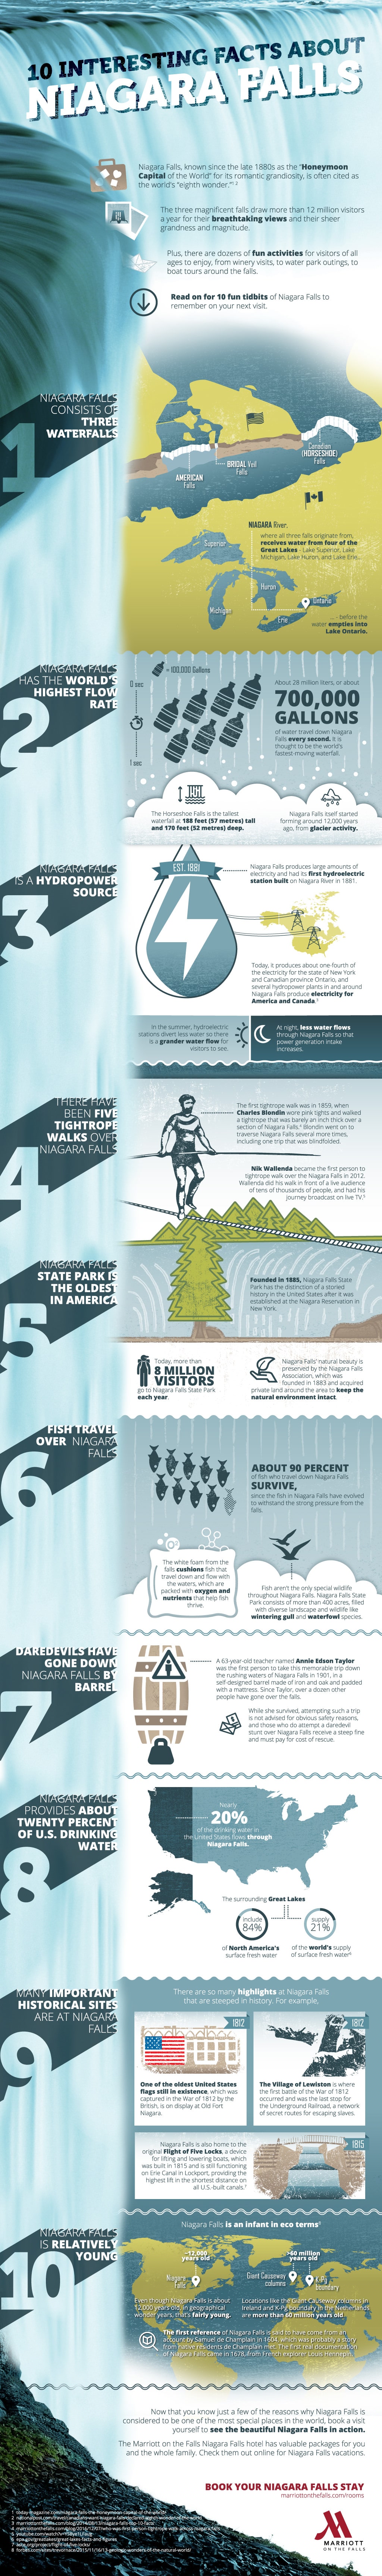 10 Interesting Facts About Niagara Falls Infographic